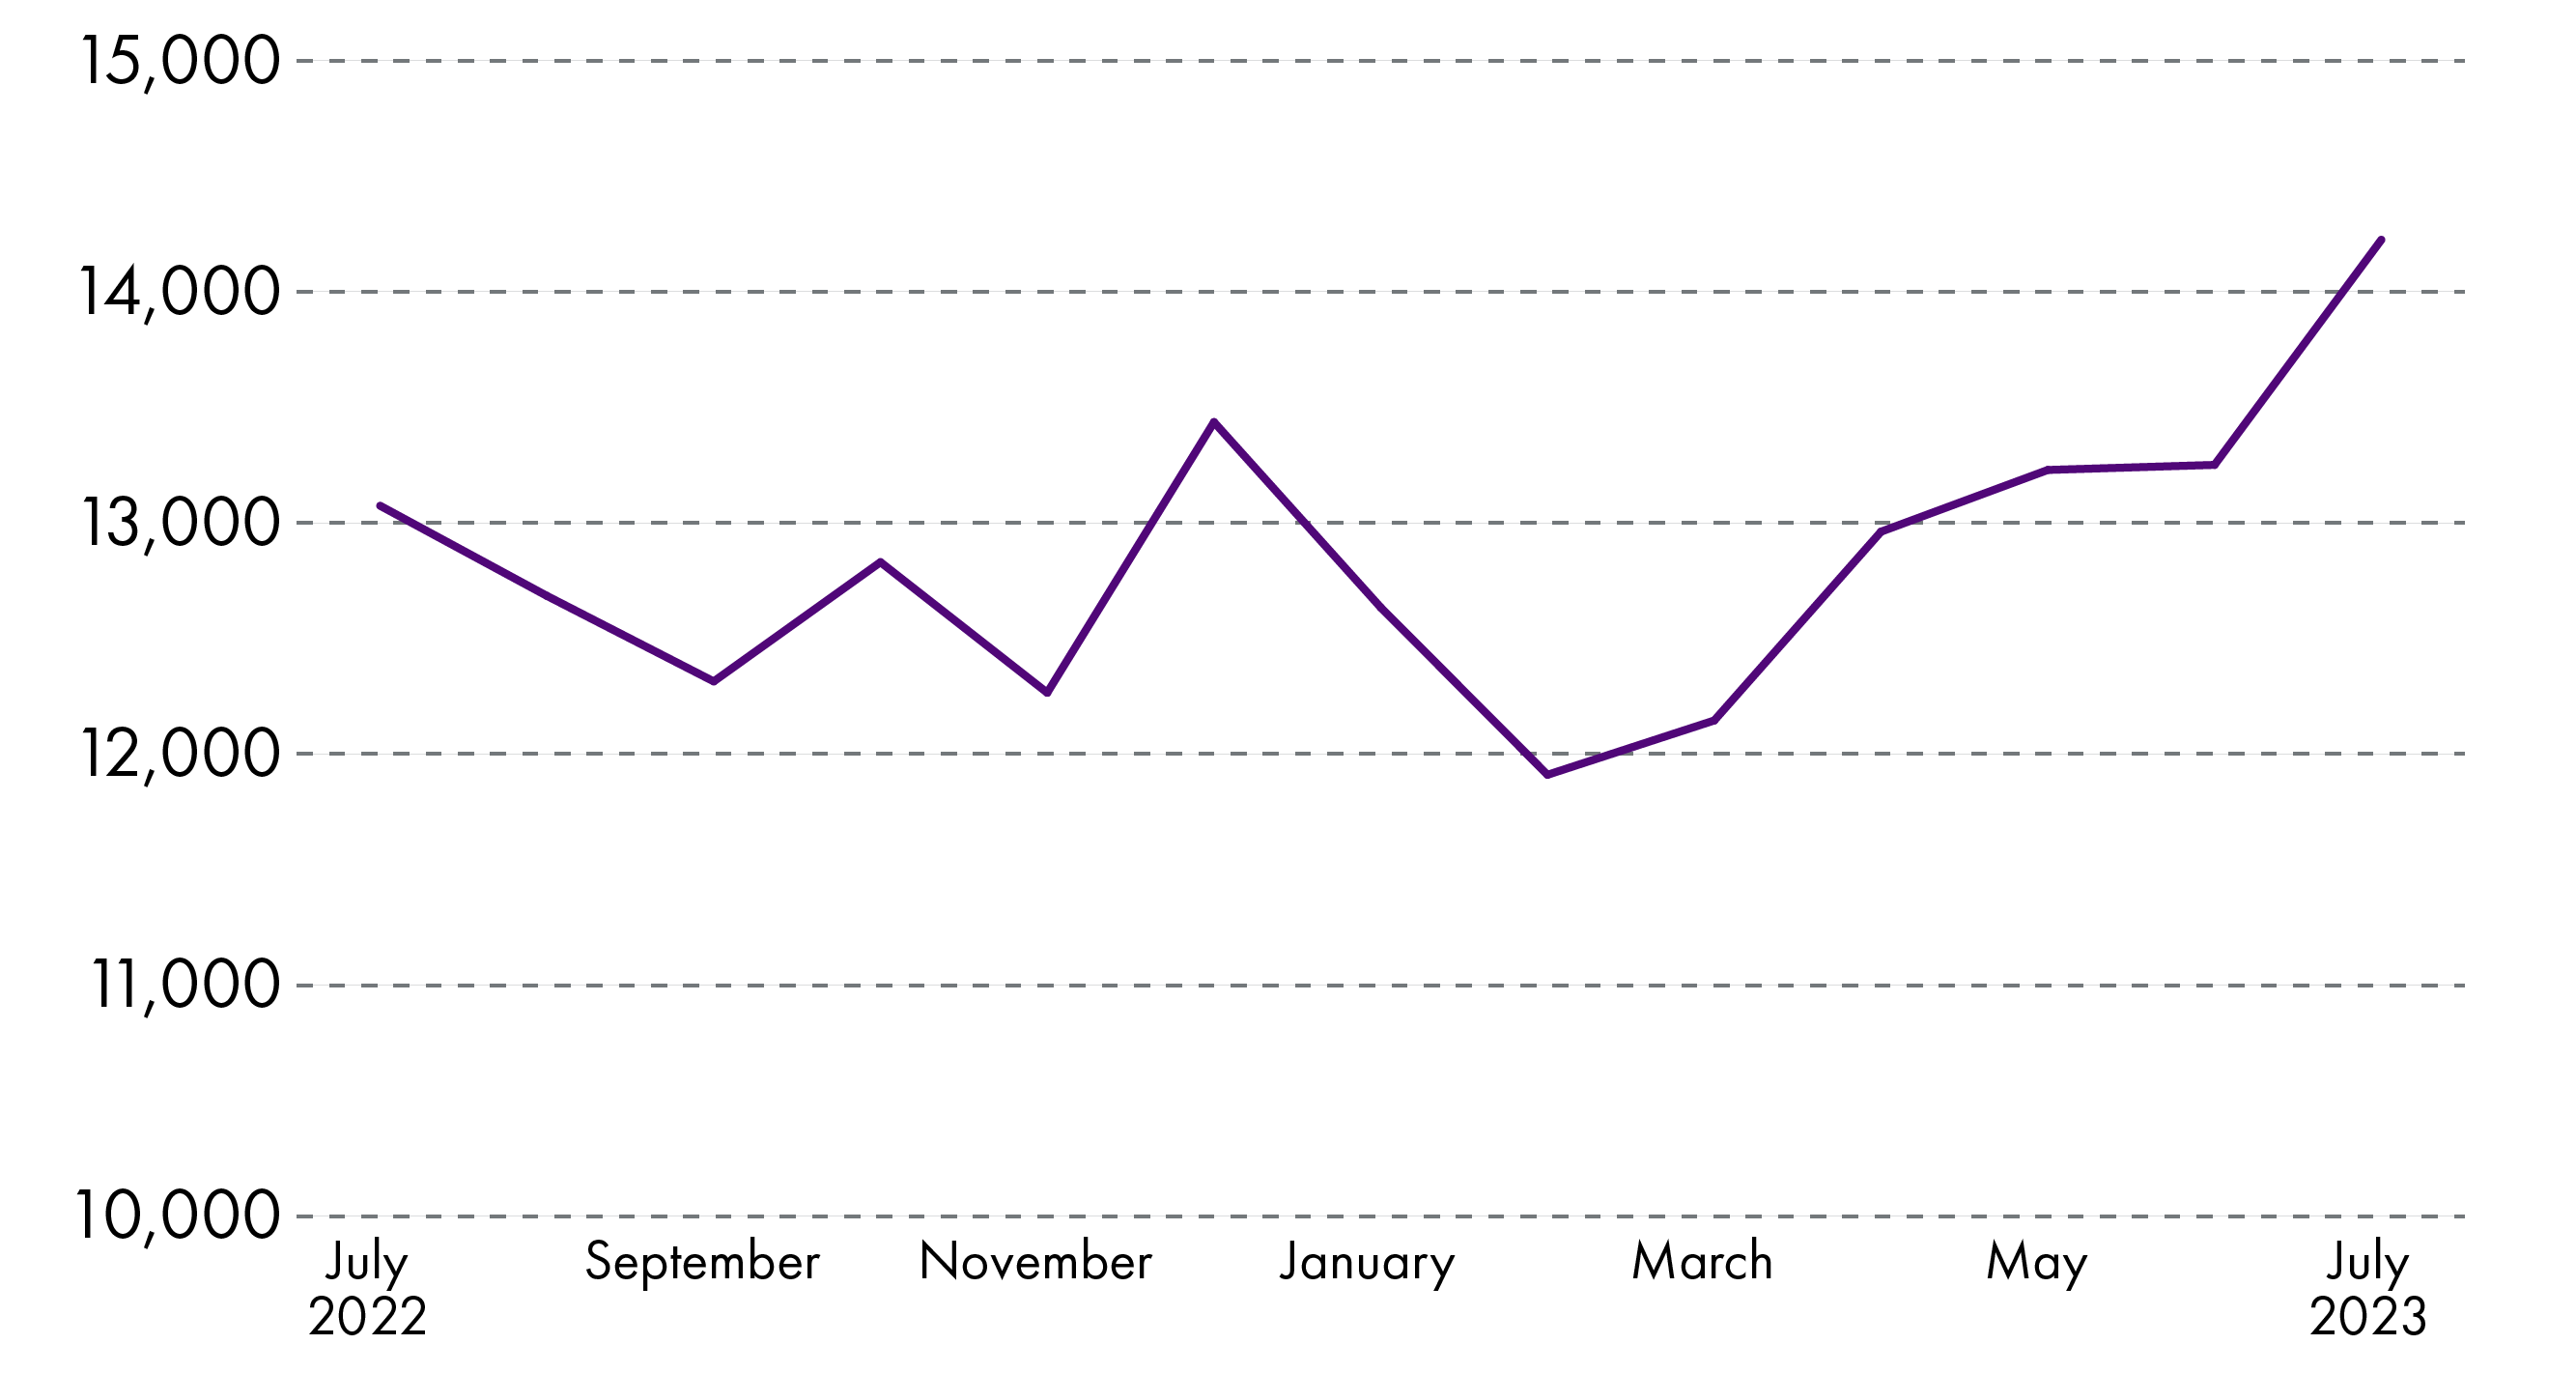 A line chart showing number of calls to the NHS 24 Breathing Space service between July 2022 and July 2023. The number of calls has increased each month from February 2023 onwards.